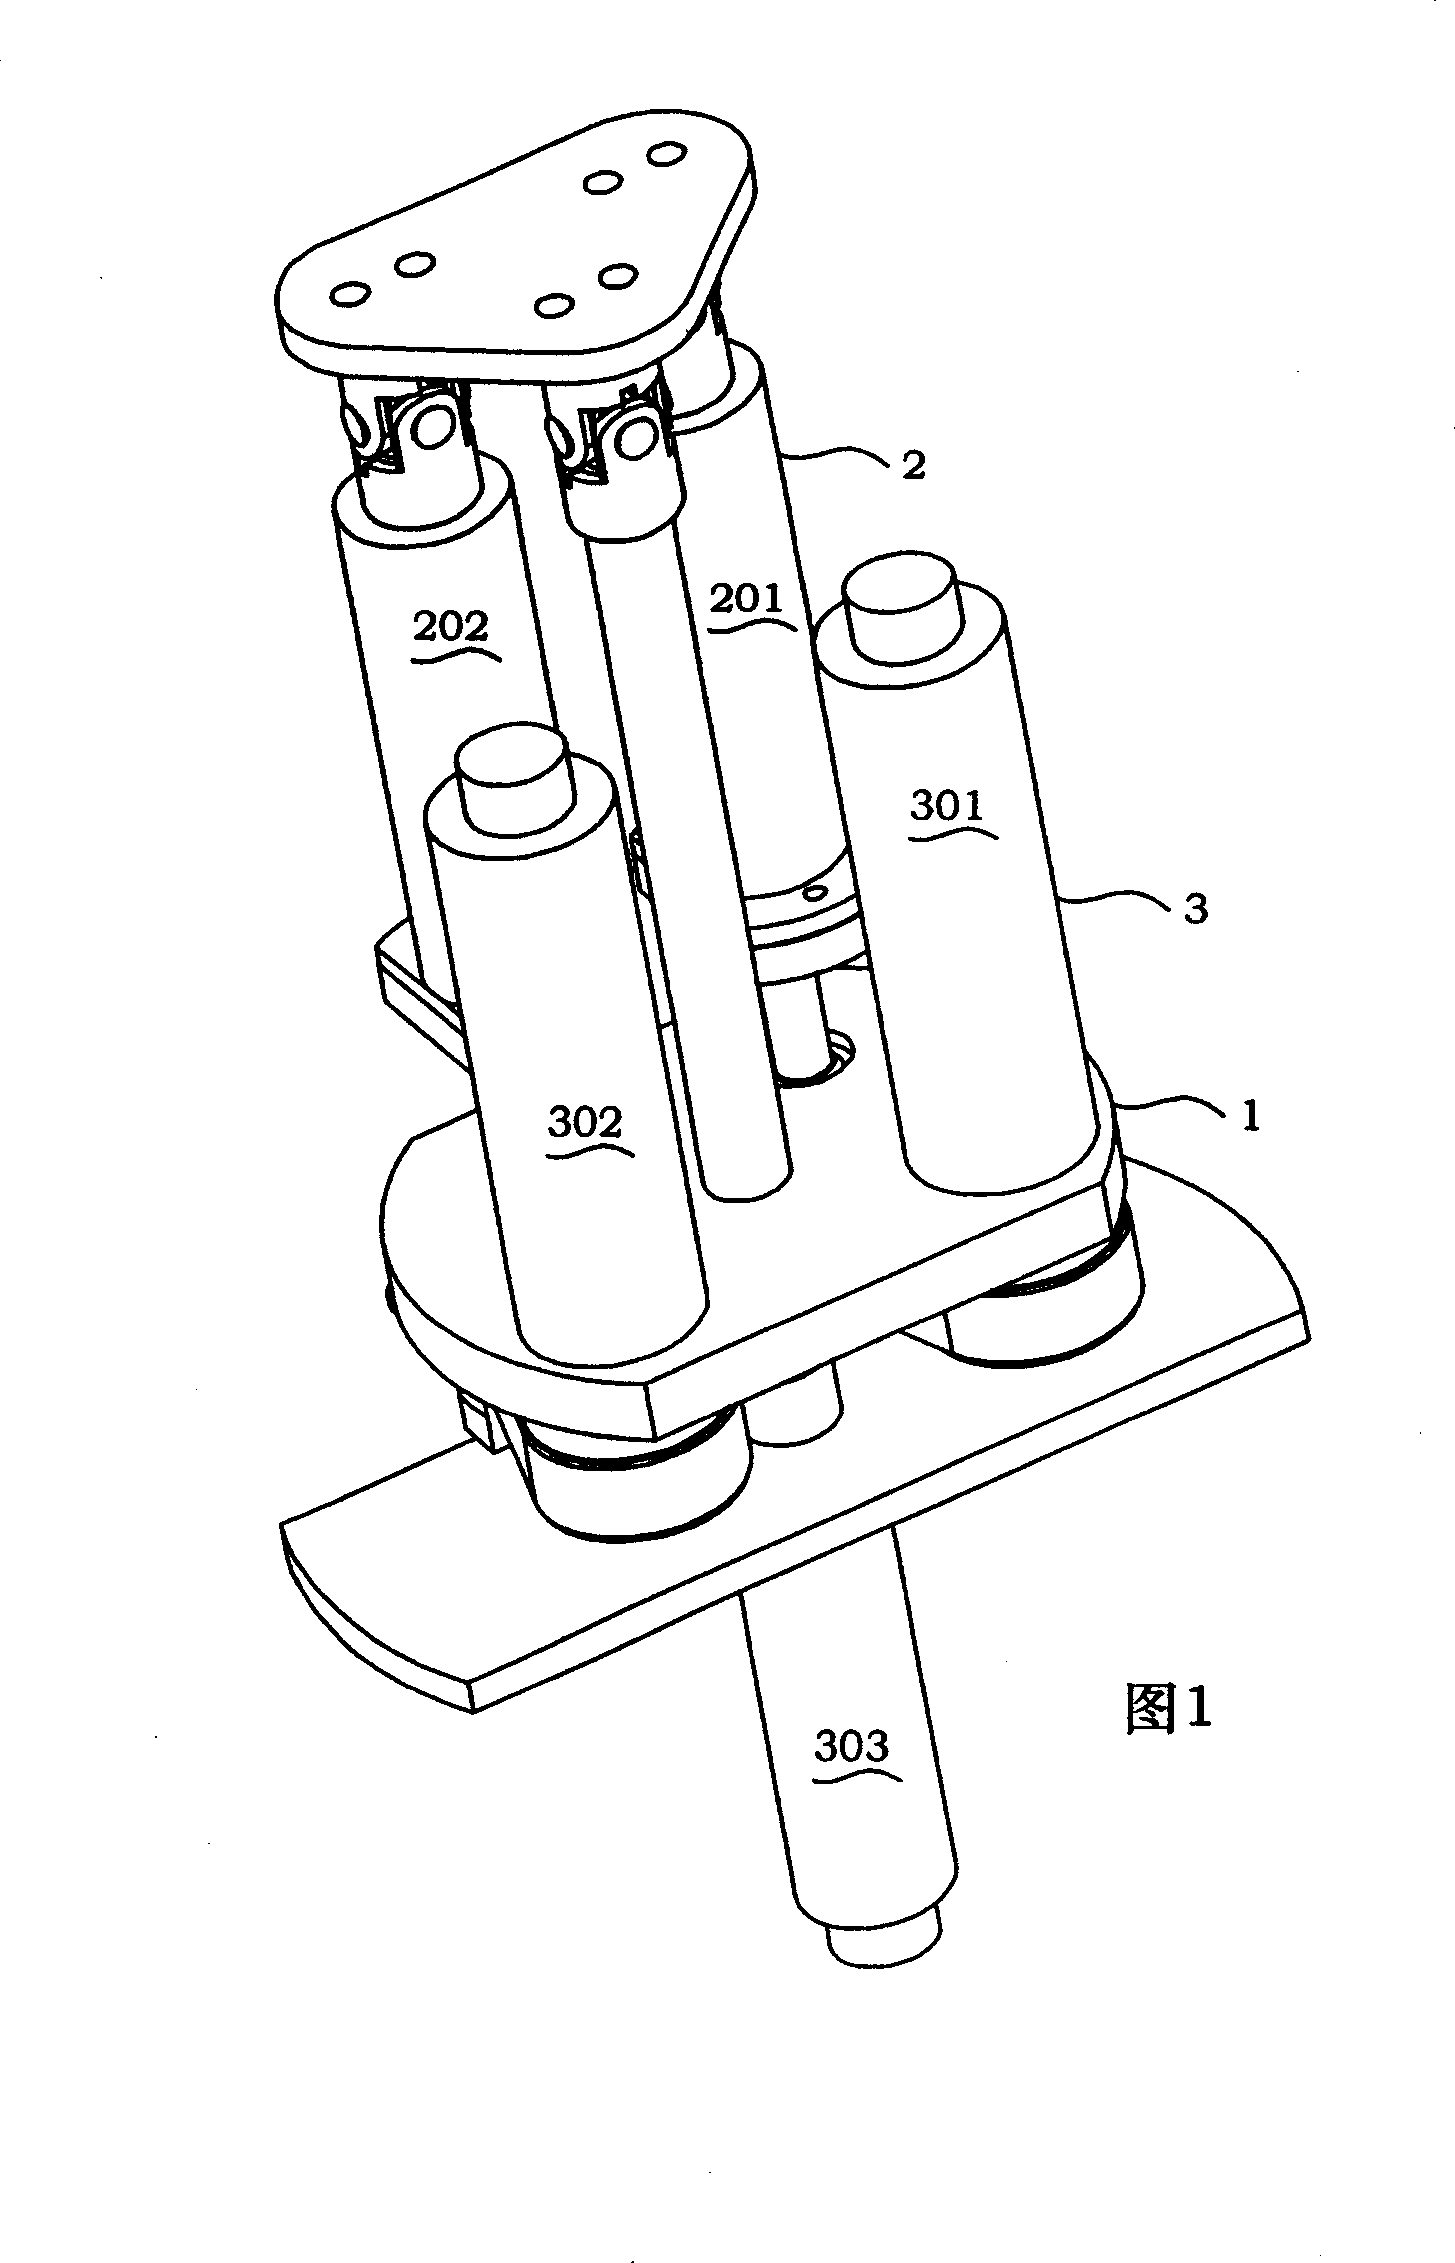 Series-parallel connection active equivalent ball-joint mechanism